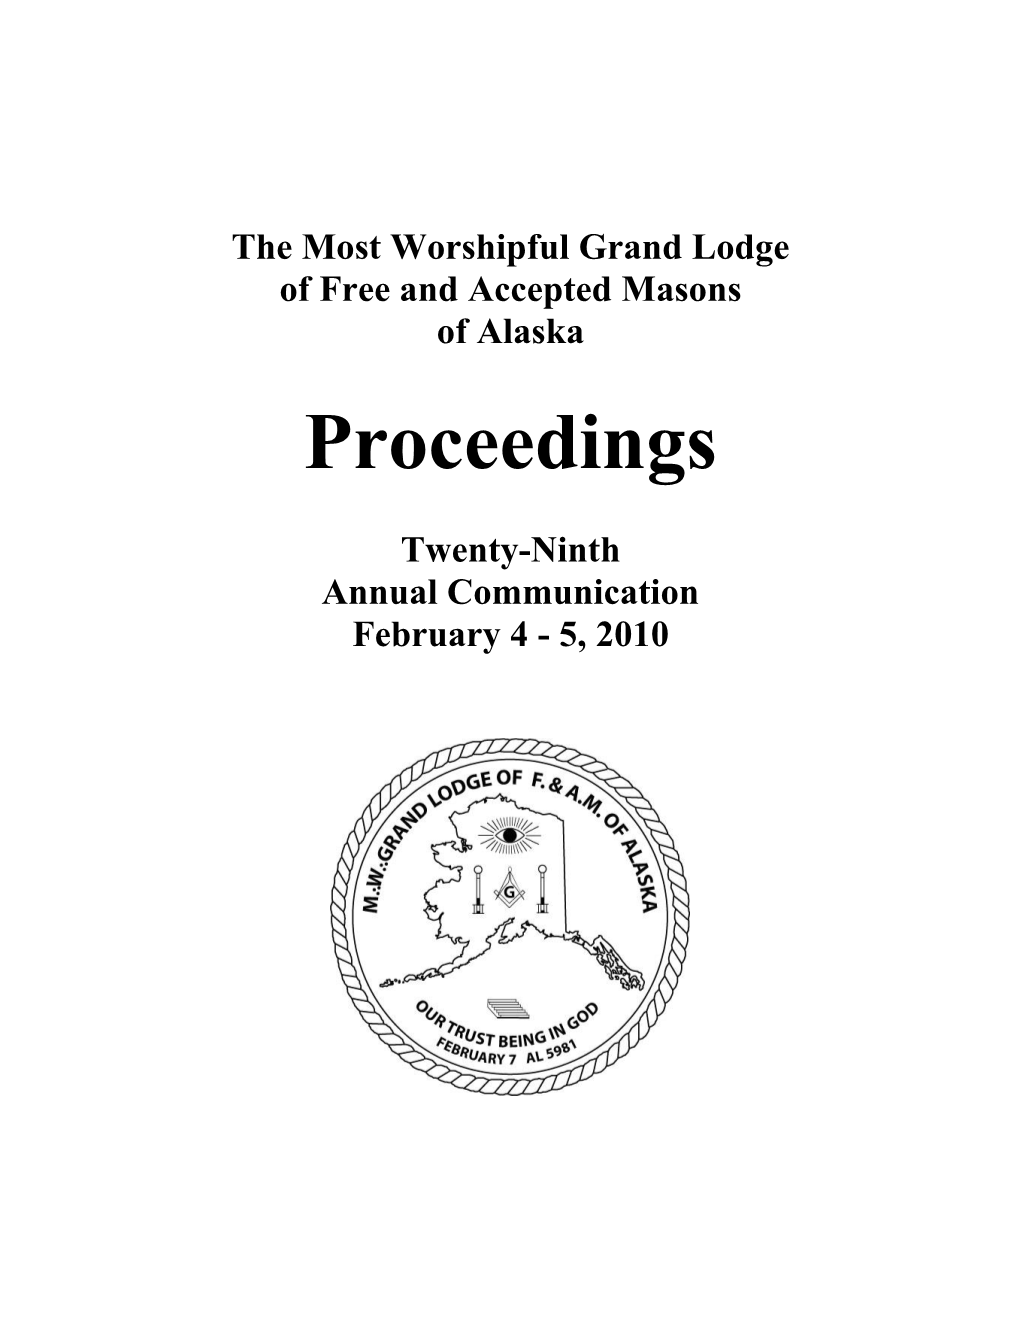 Most Worshipful Grand Lodge of Free and Accepted Masons of Alaska